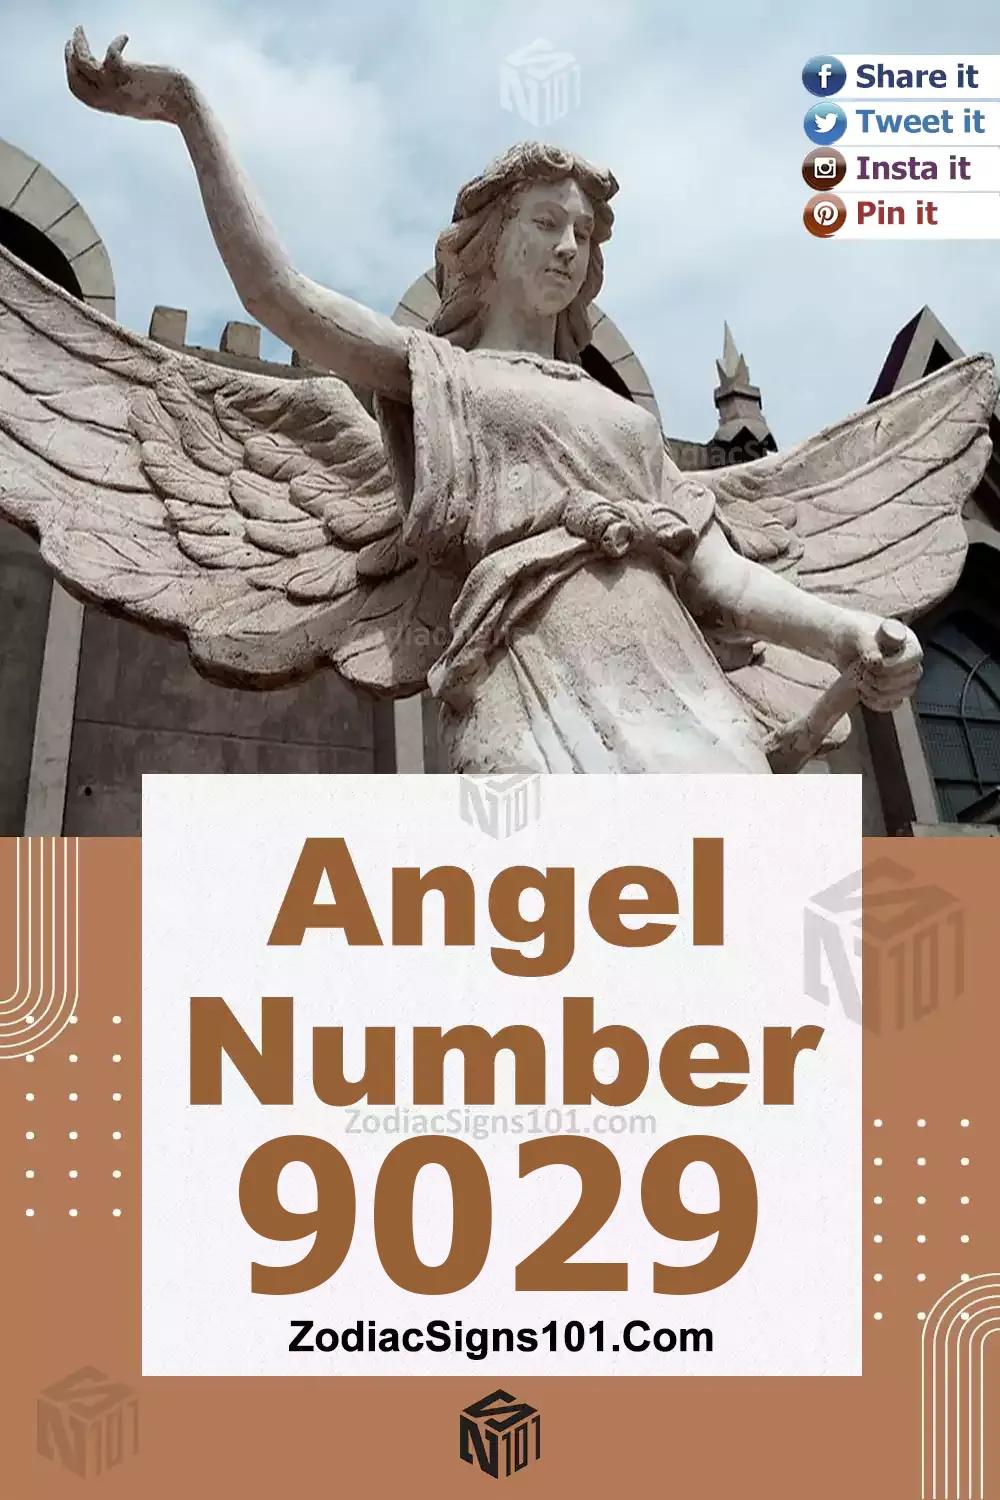 9029 Angel Number Meaning